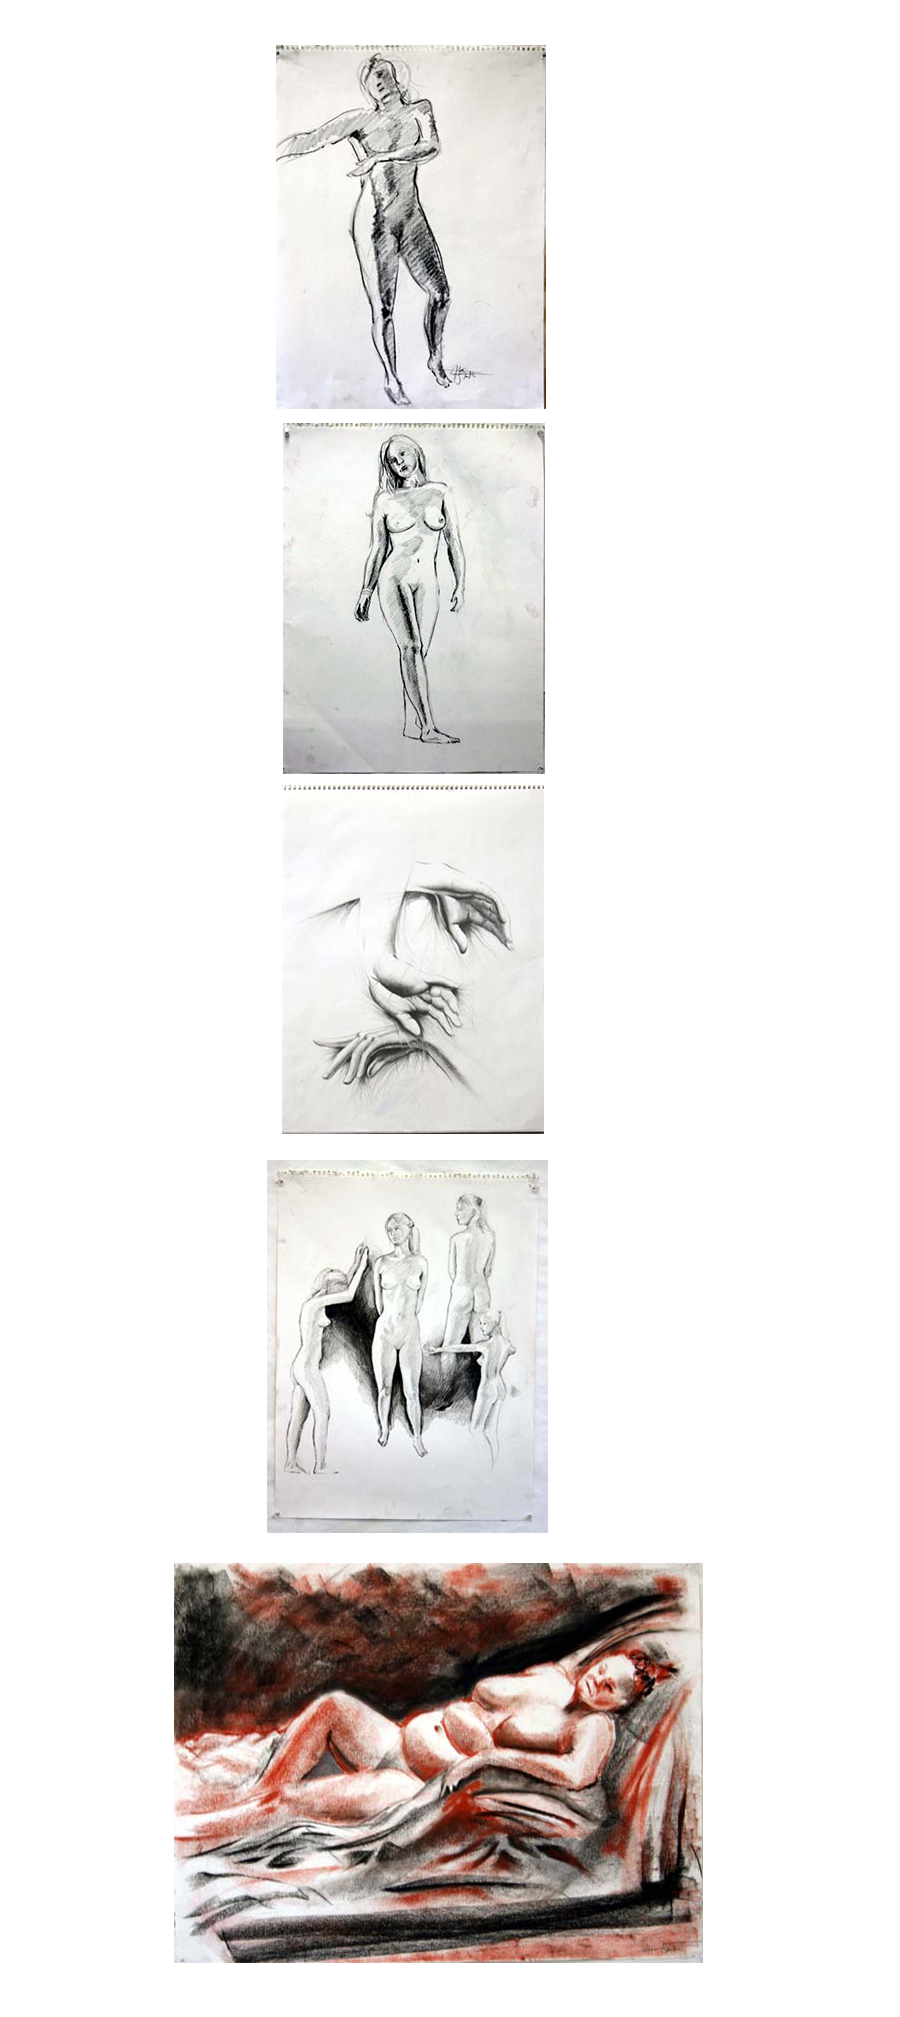 Live model figurative drawings created with charcoal, conte, and graphite pencils on paper.